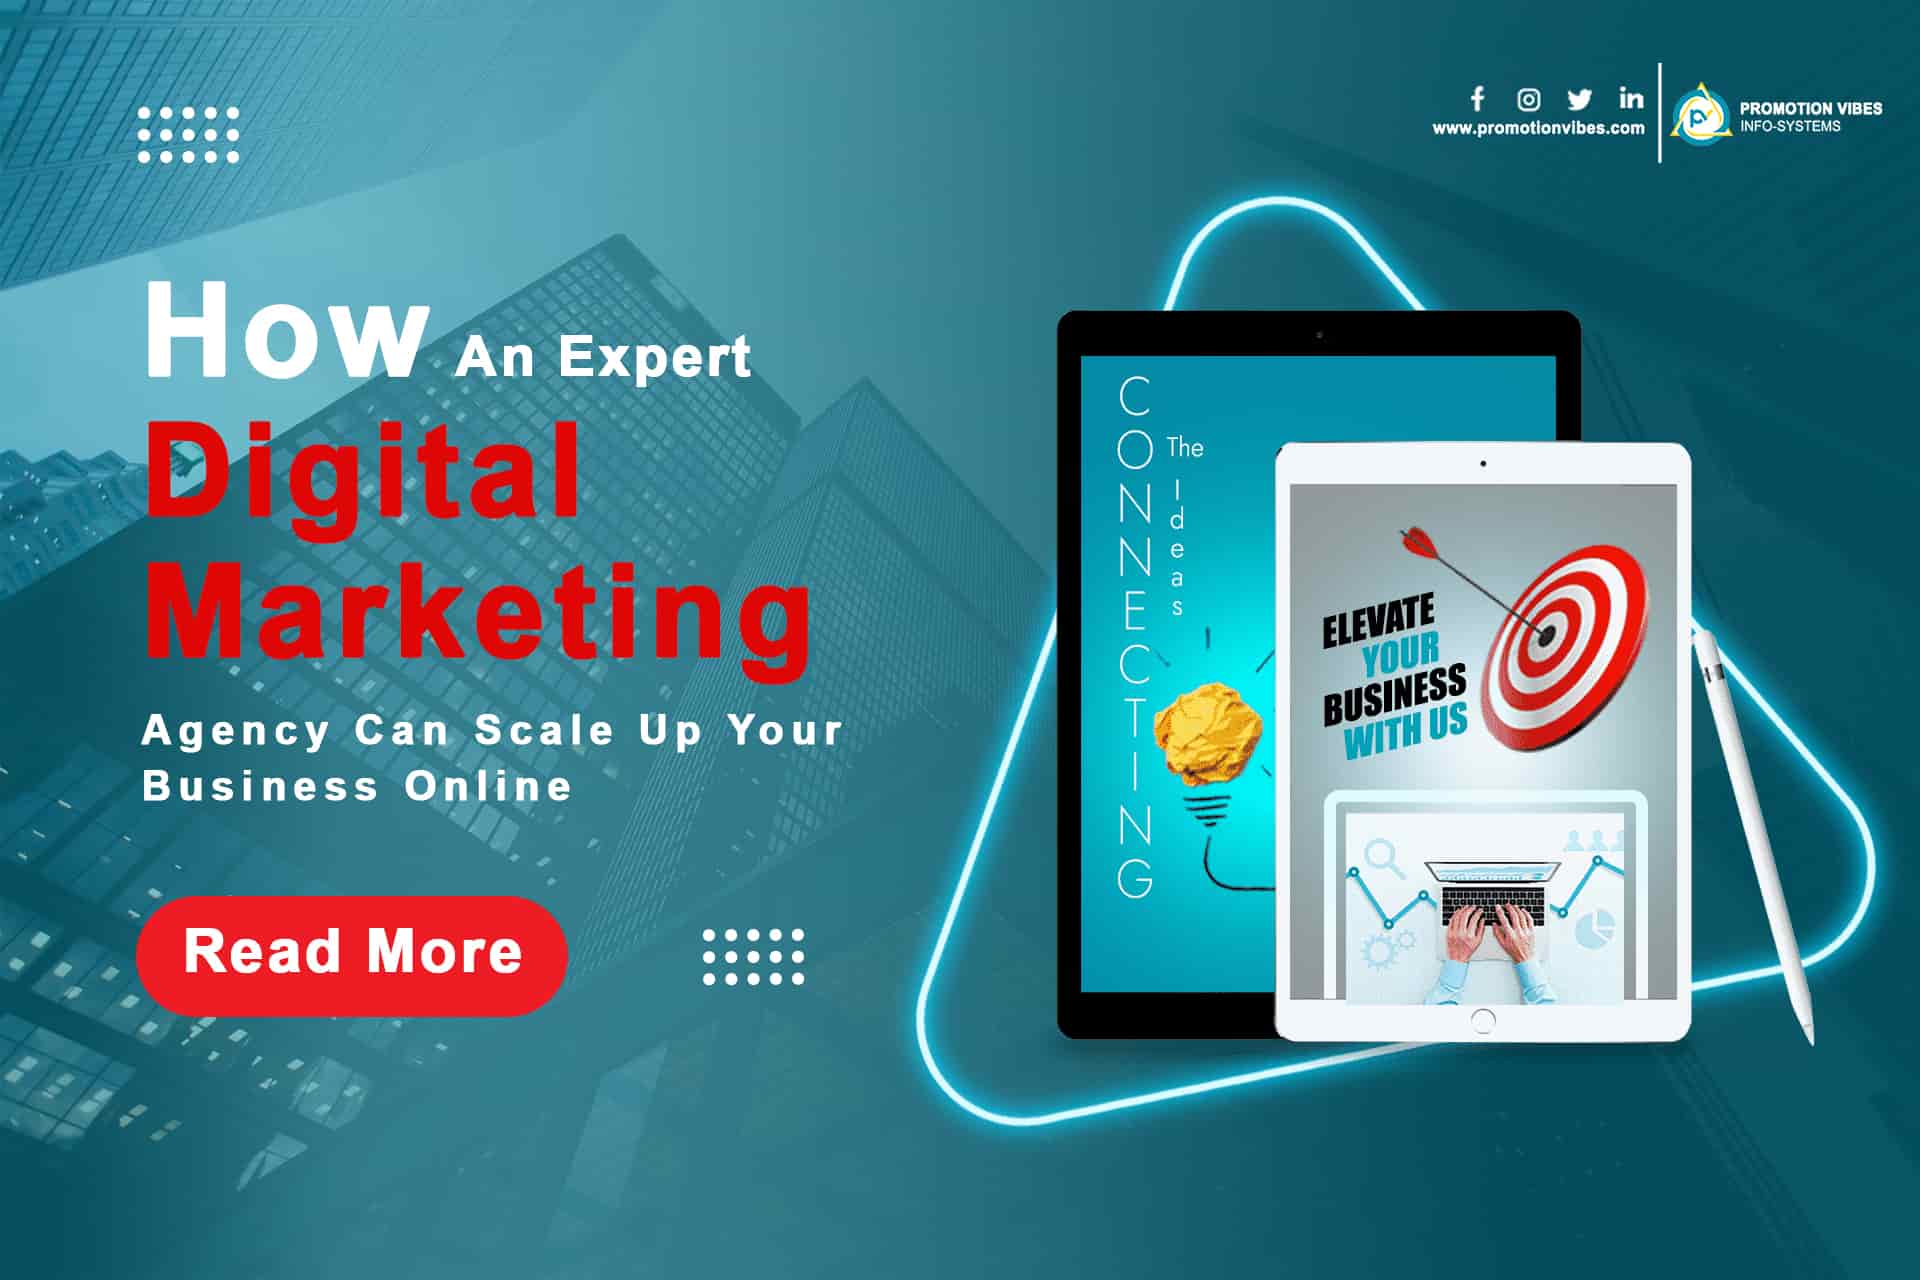 how an expert digital marketing agency can scale up your business online